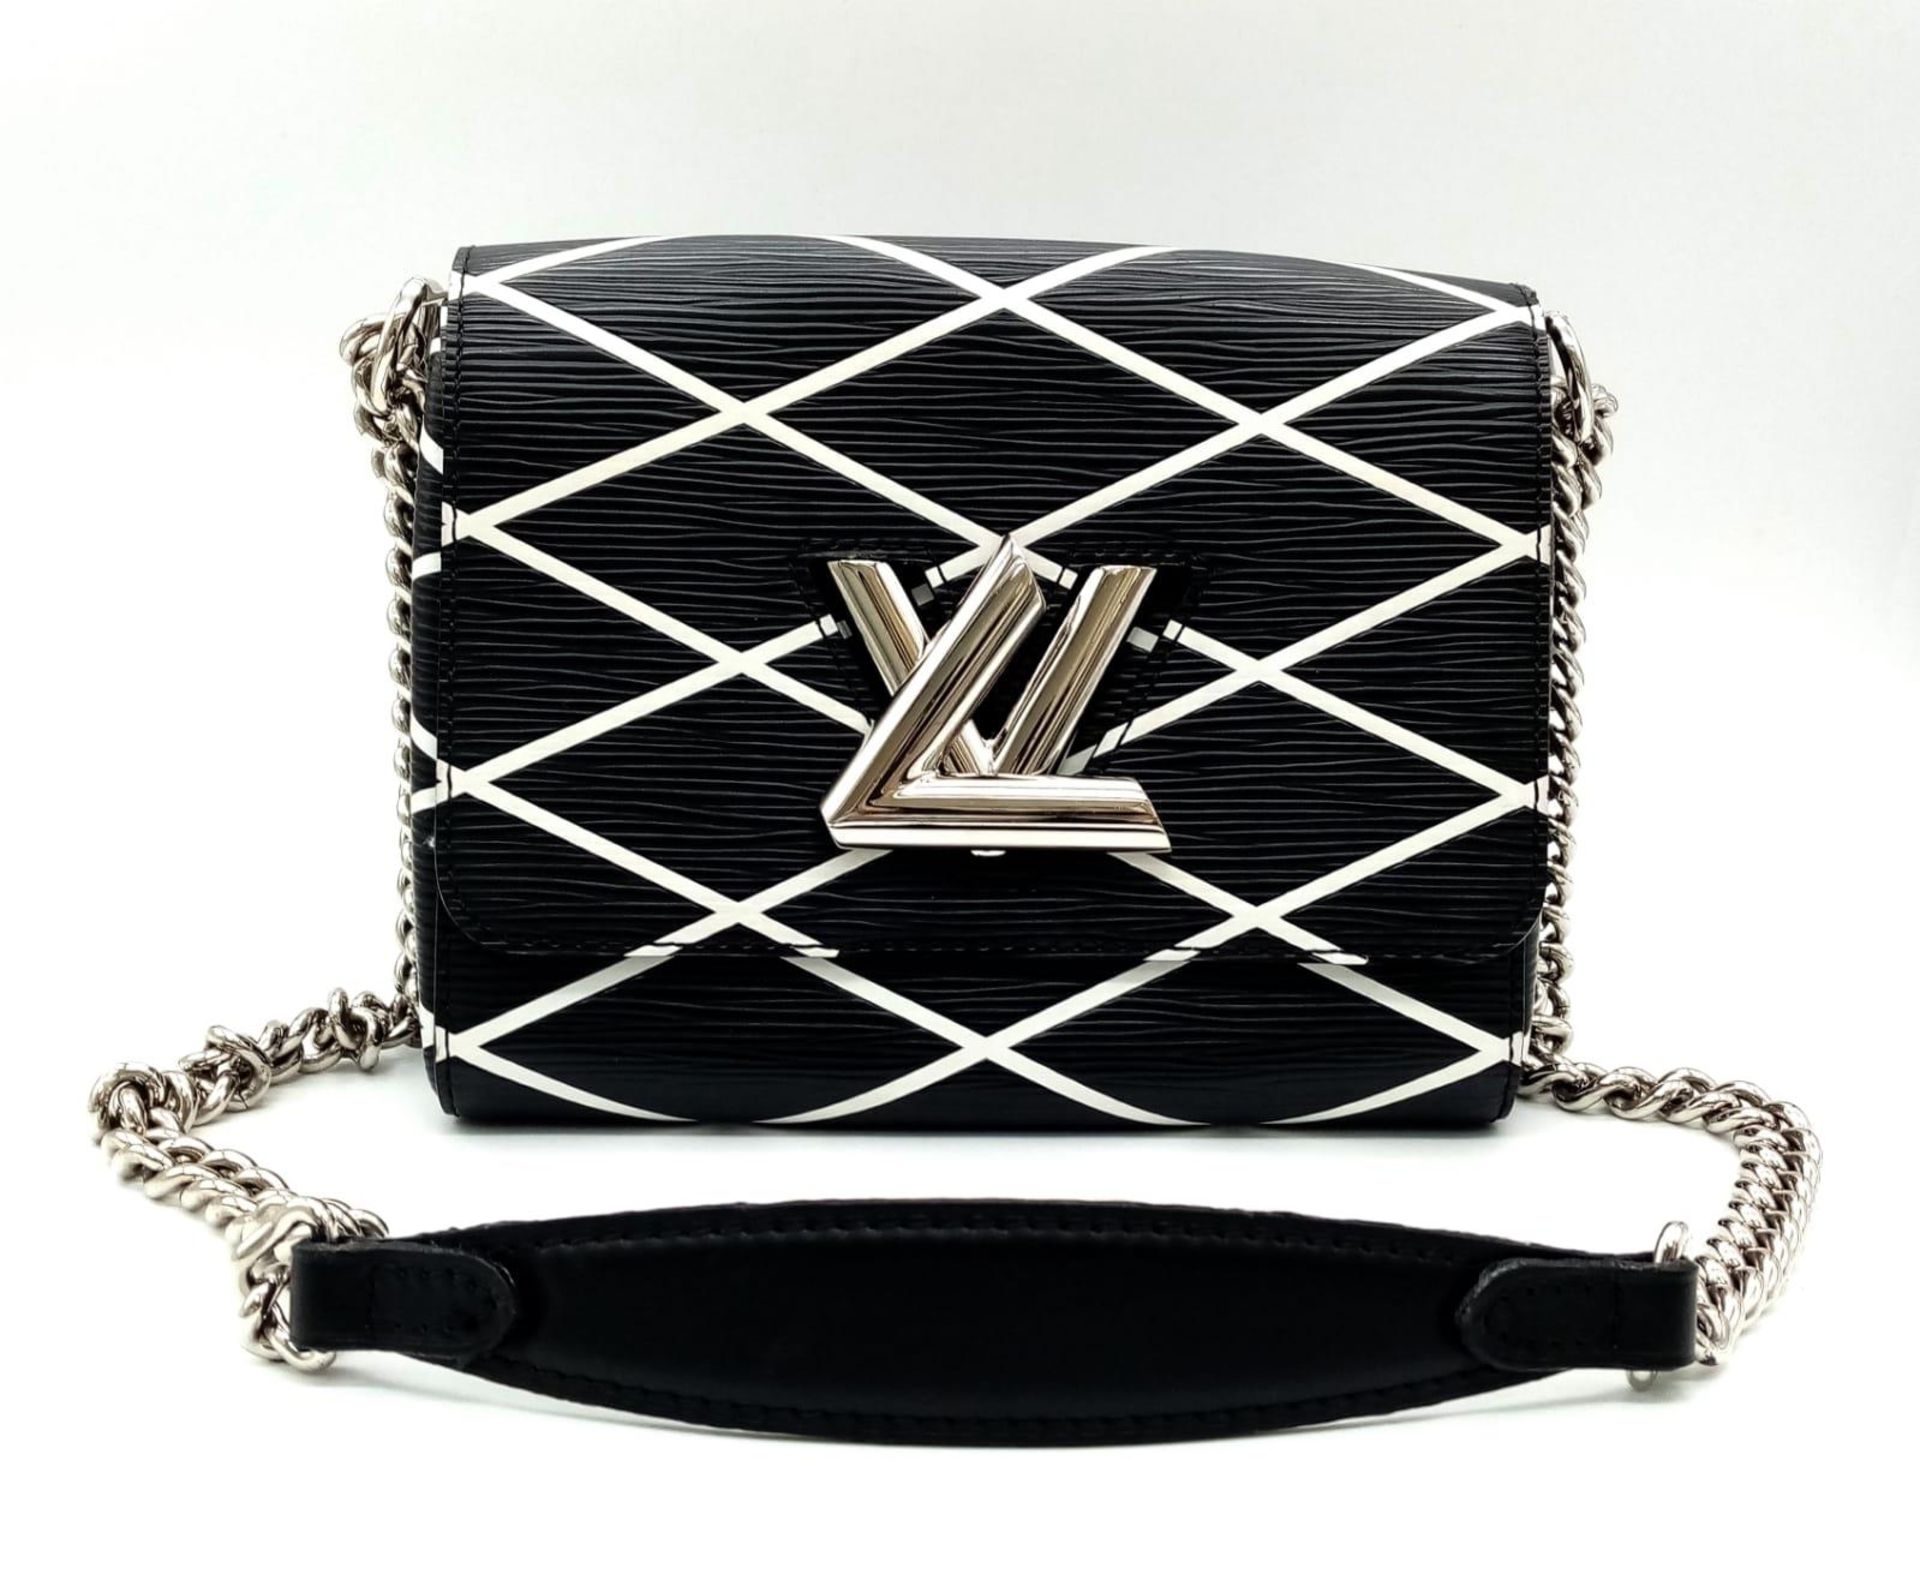 A Louis Vuitton Twist Shoulder Bag in Black Epi Leather with White Diamond Pattern, Silver Coloured